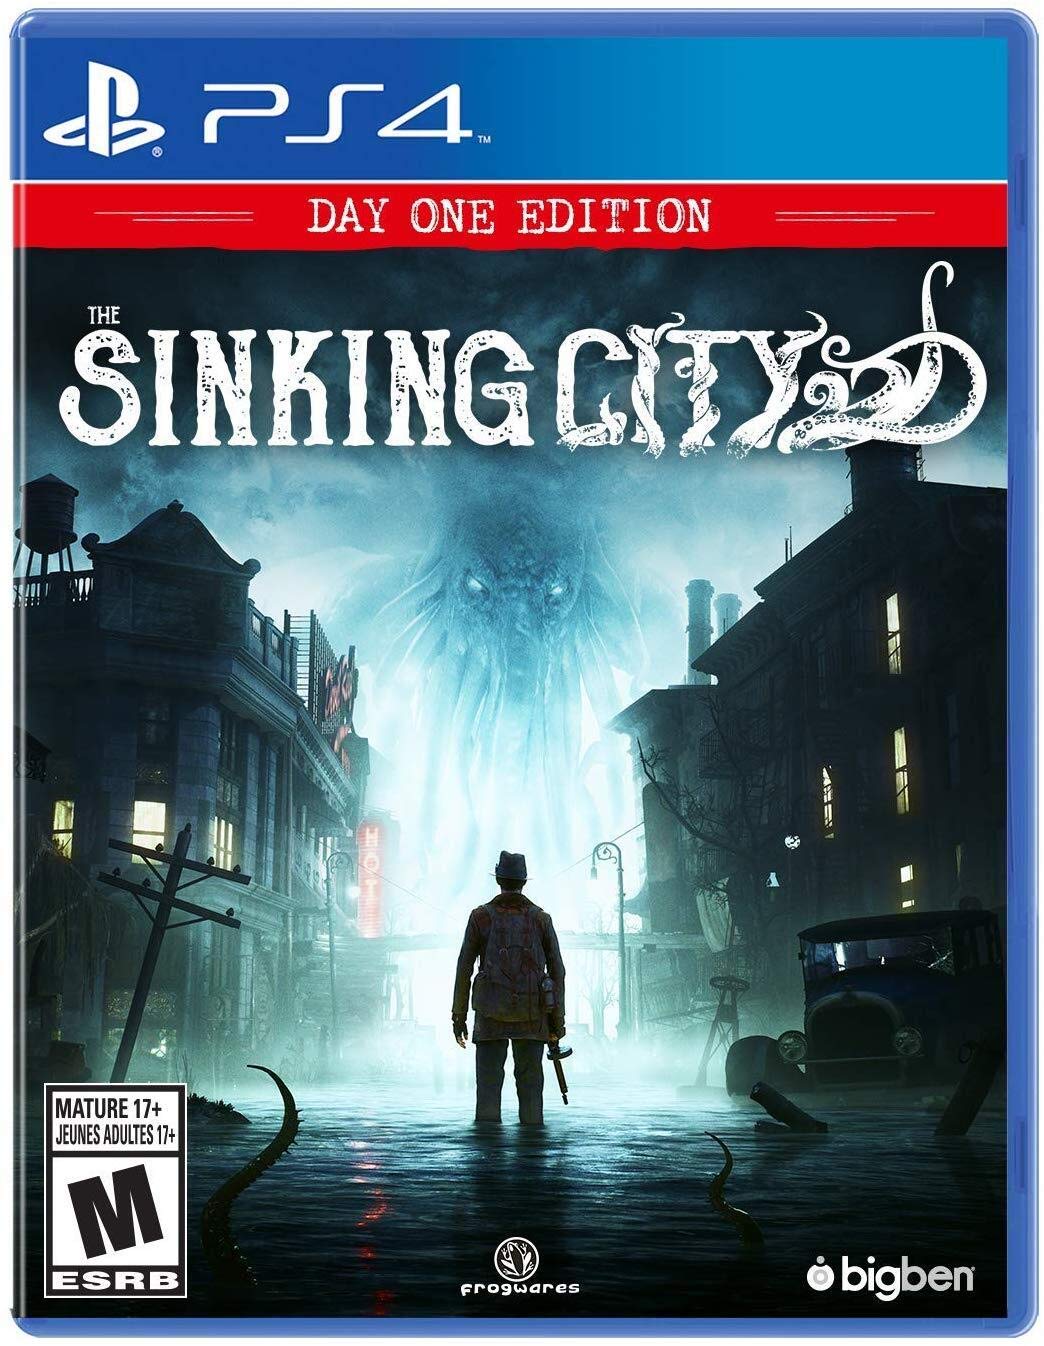 0901 - The Sinking City/